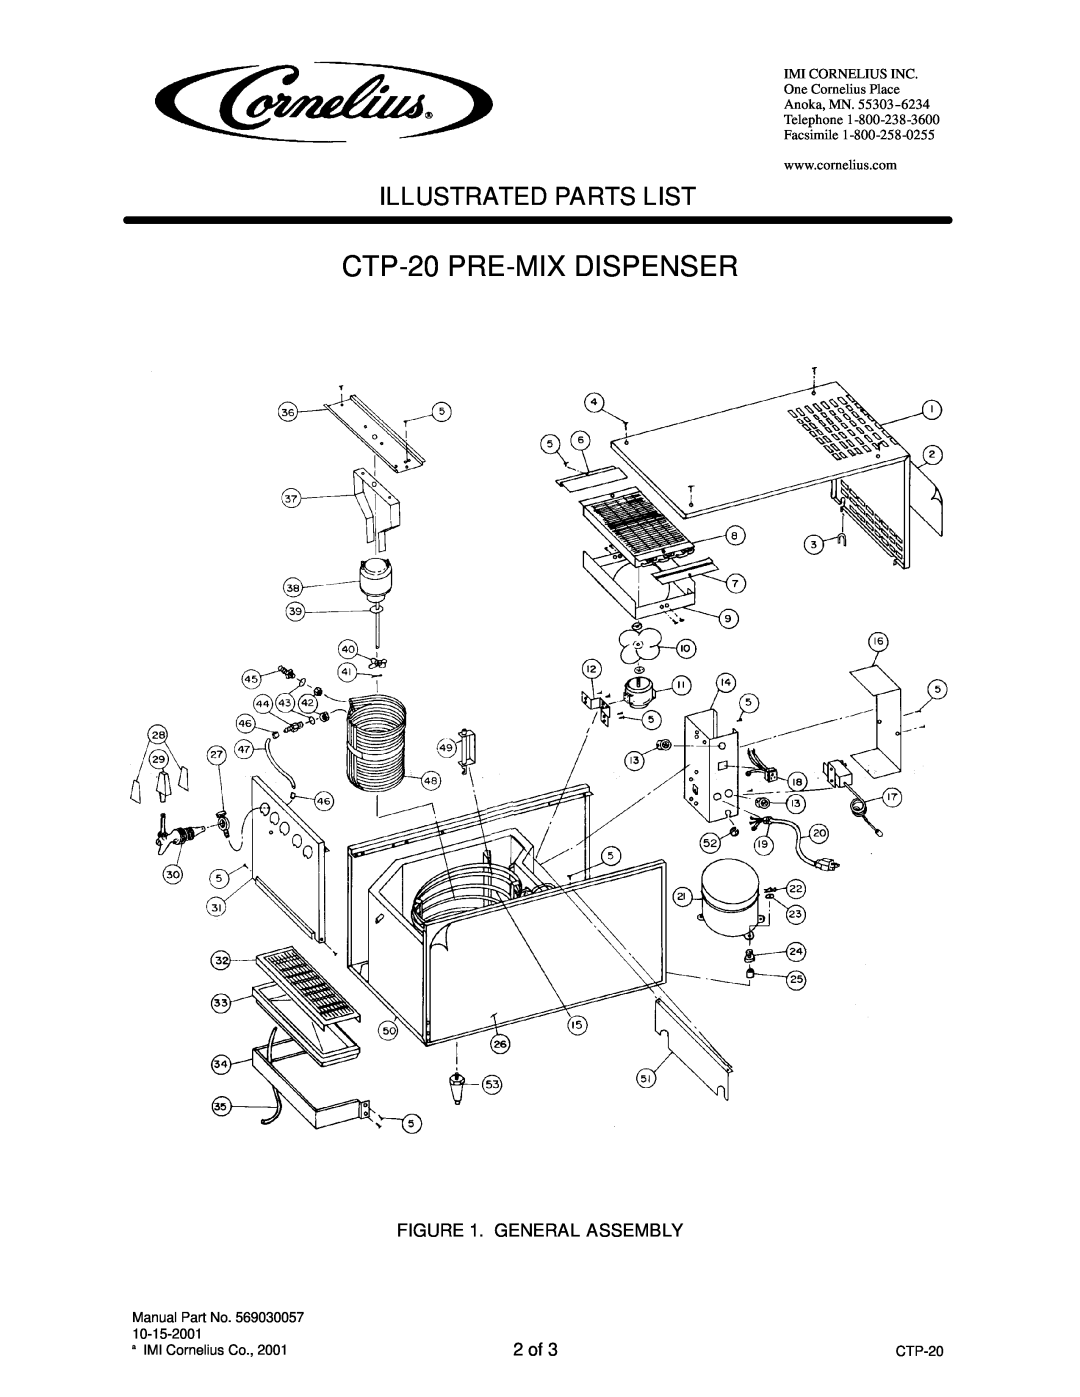 Cornelius manual CTP-20 PRE-MIXDISPENSER, General Assembly, 2 of, Illustrated Parts List 